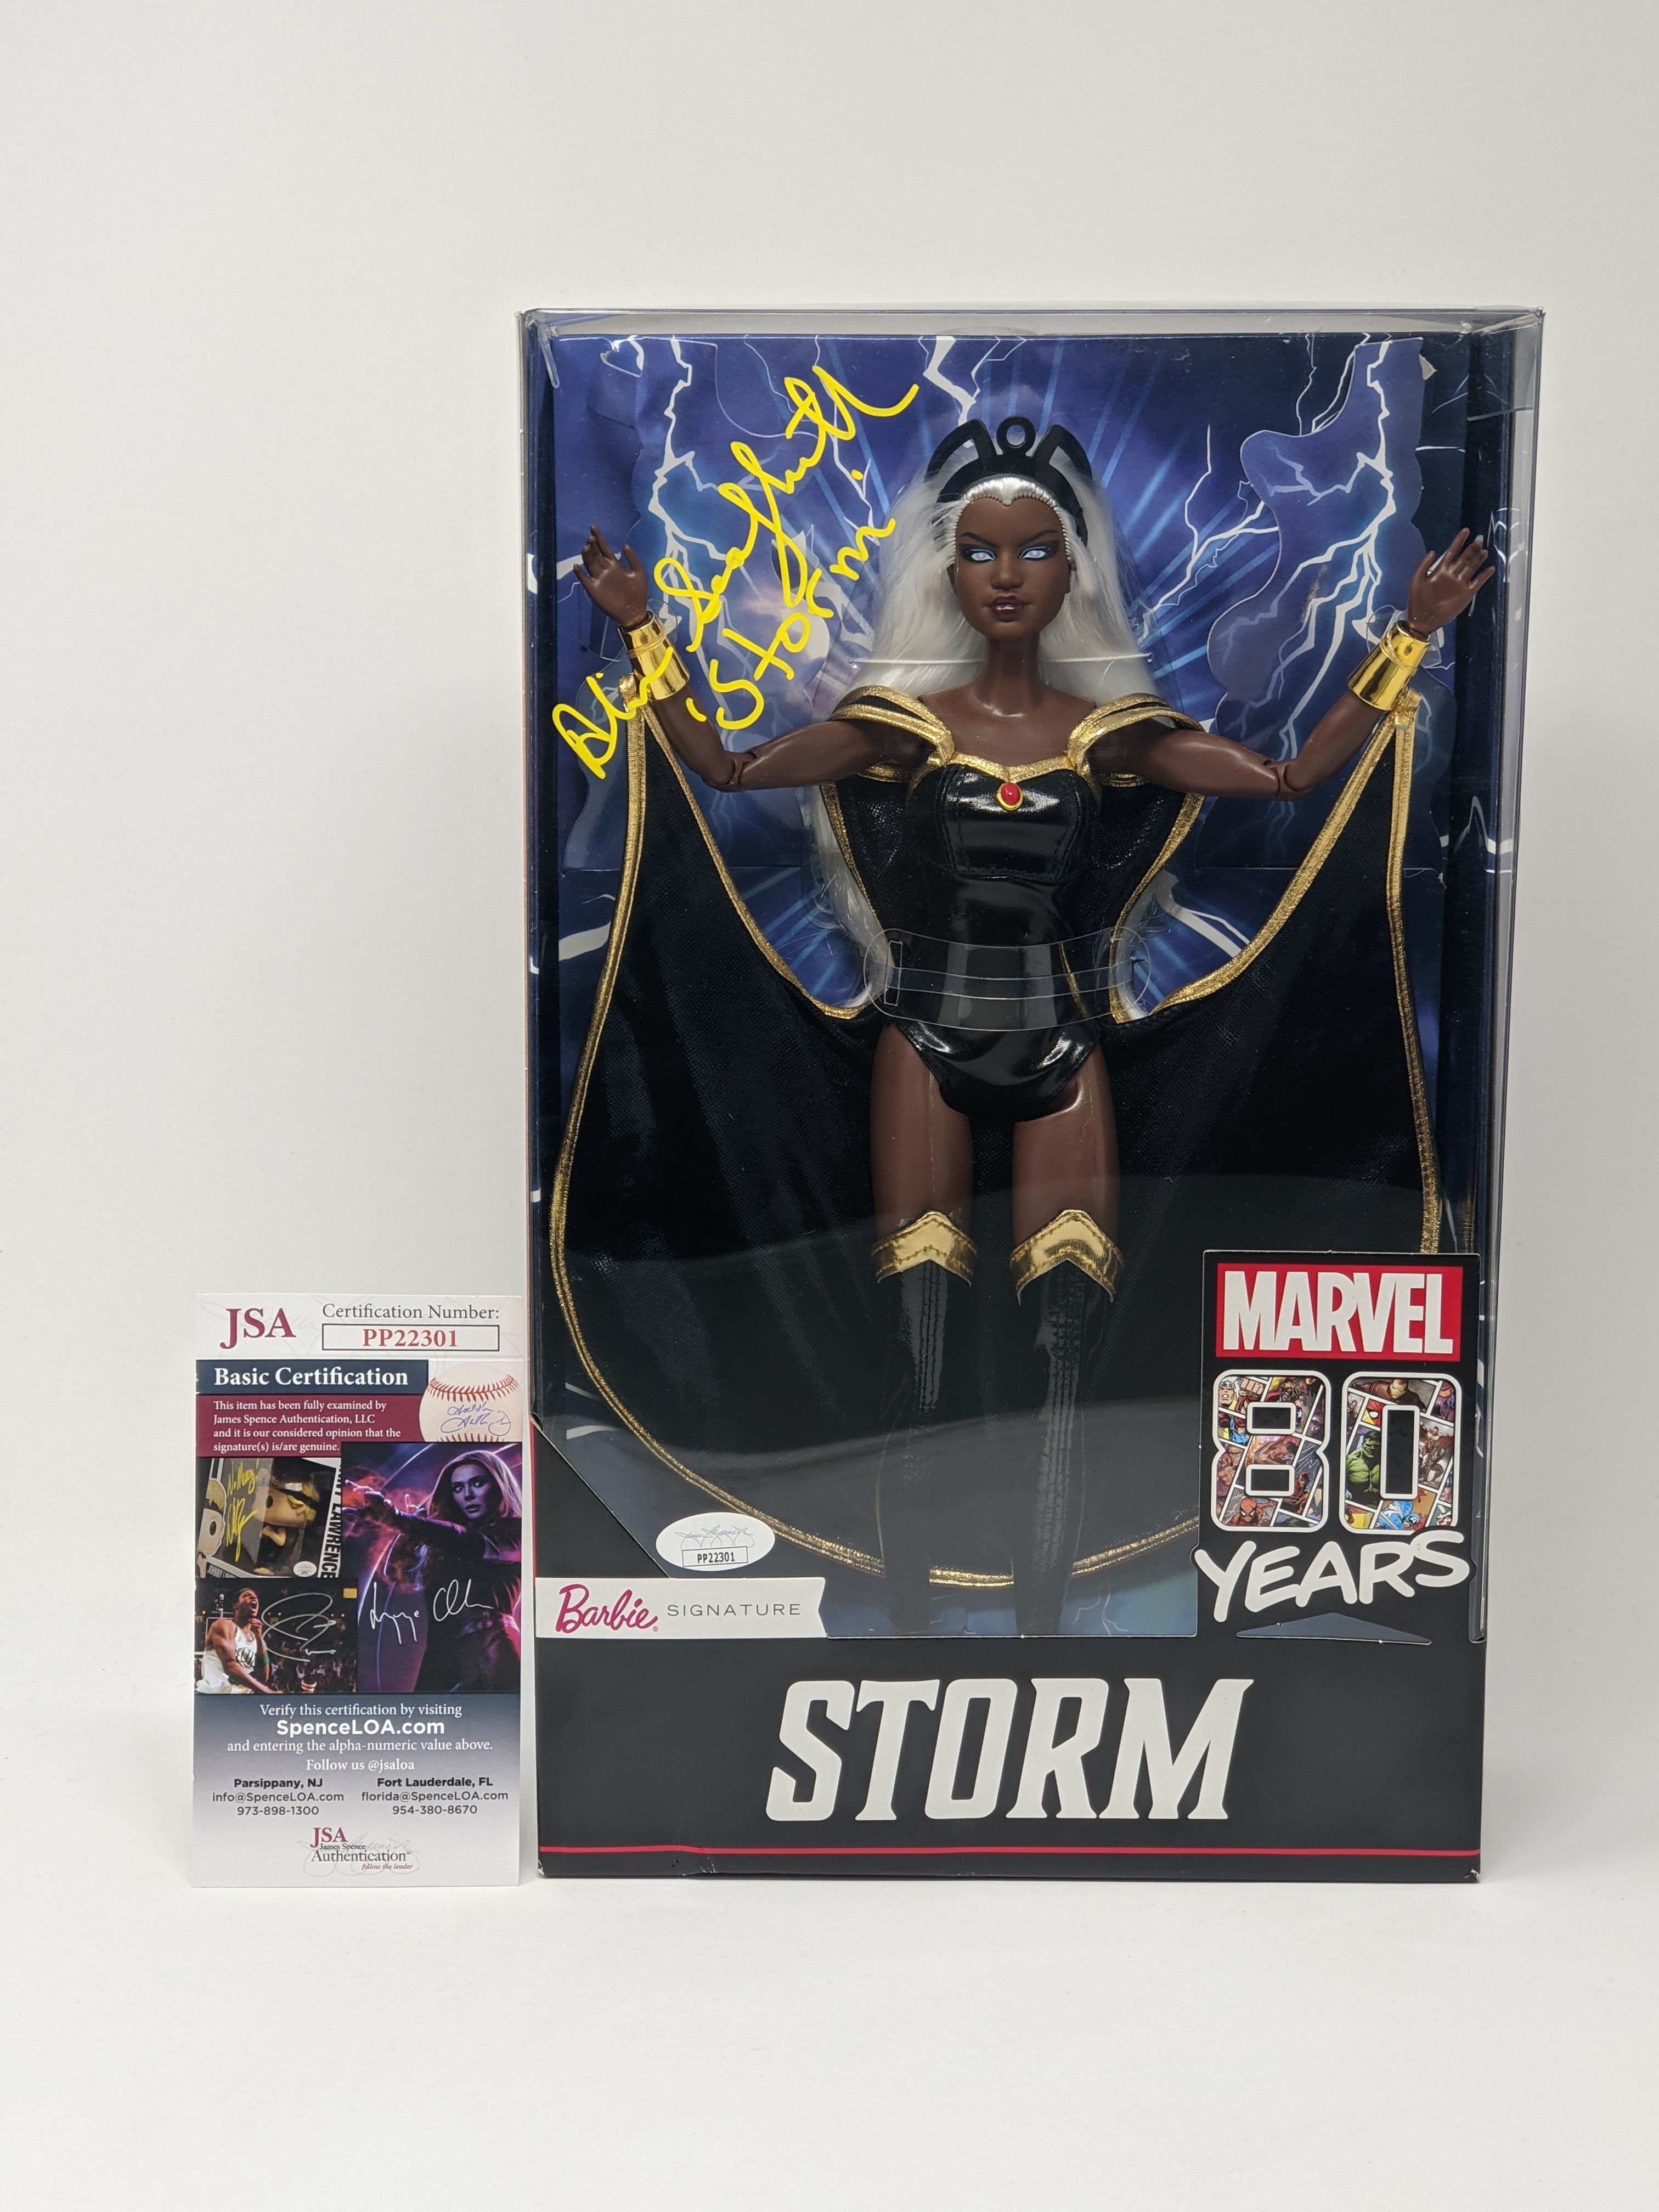 Alison Sealy-Smith Marvel Storm Signed Barbie Signature Doll JSA COA Certified Authograph